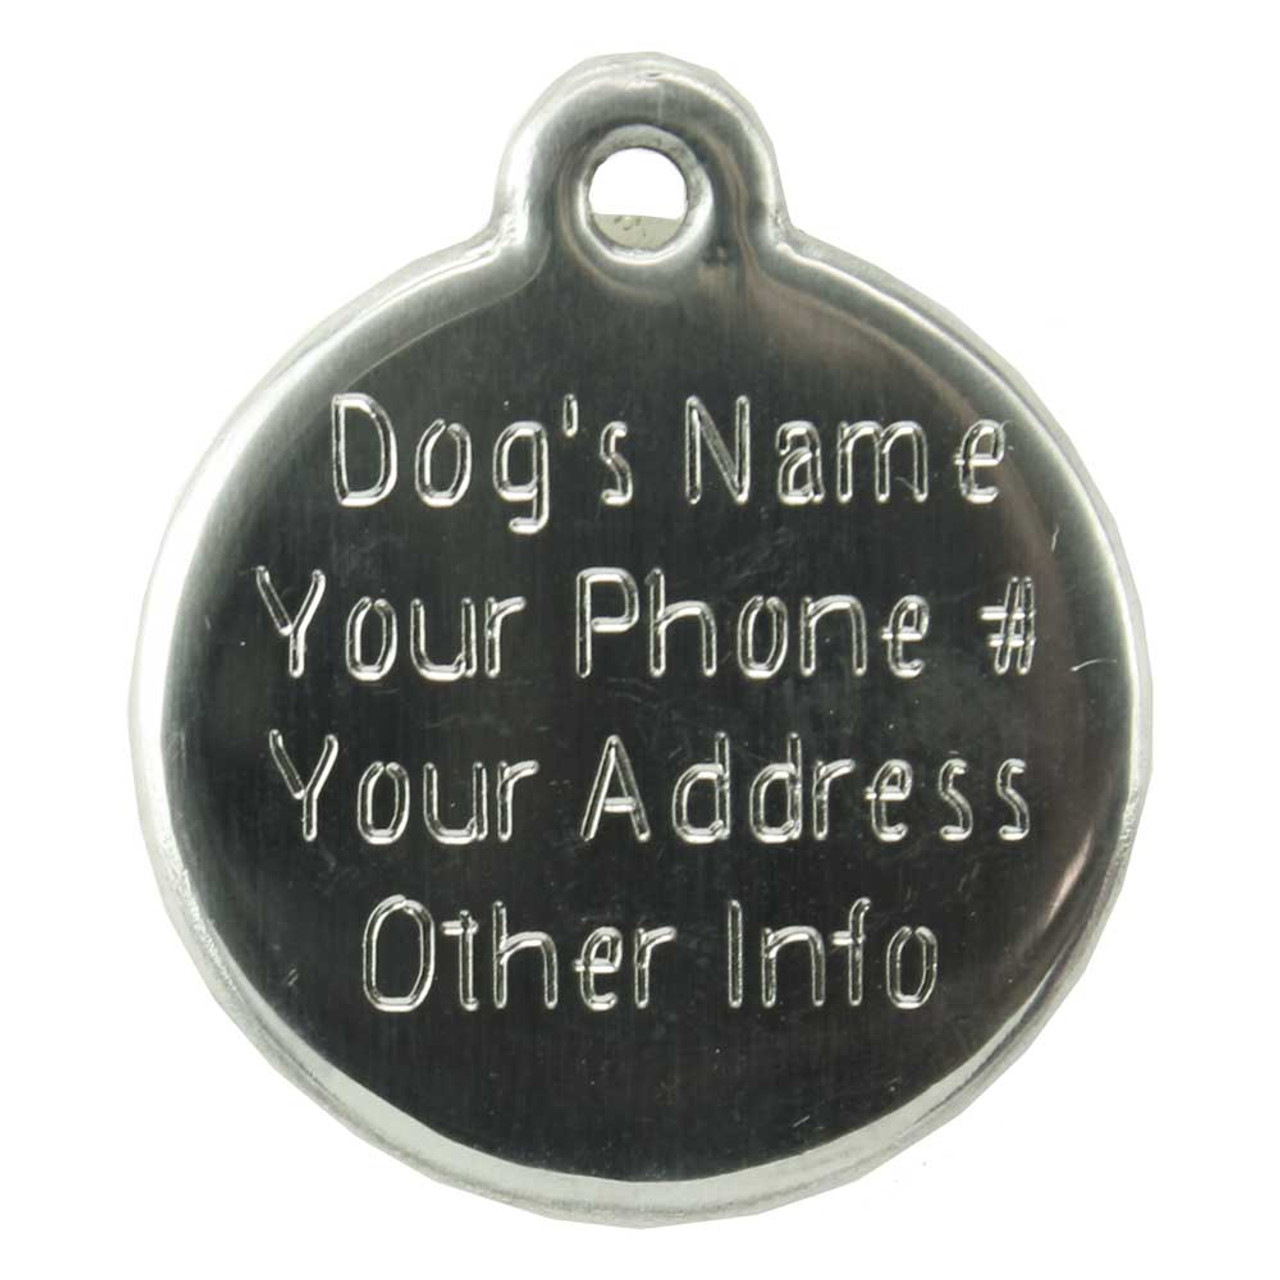 Princess Queen Dog ID Tag, Hot Pink Enameling, Stainless Steel